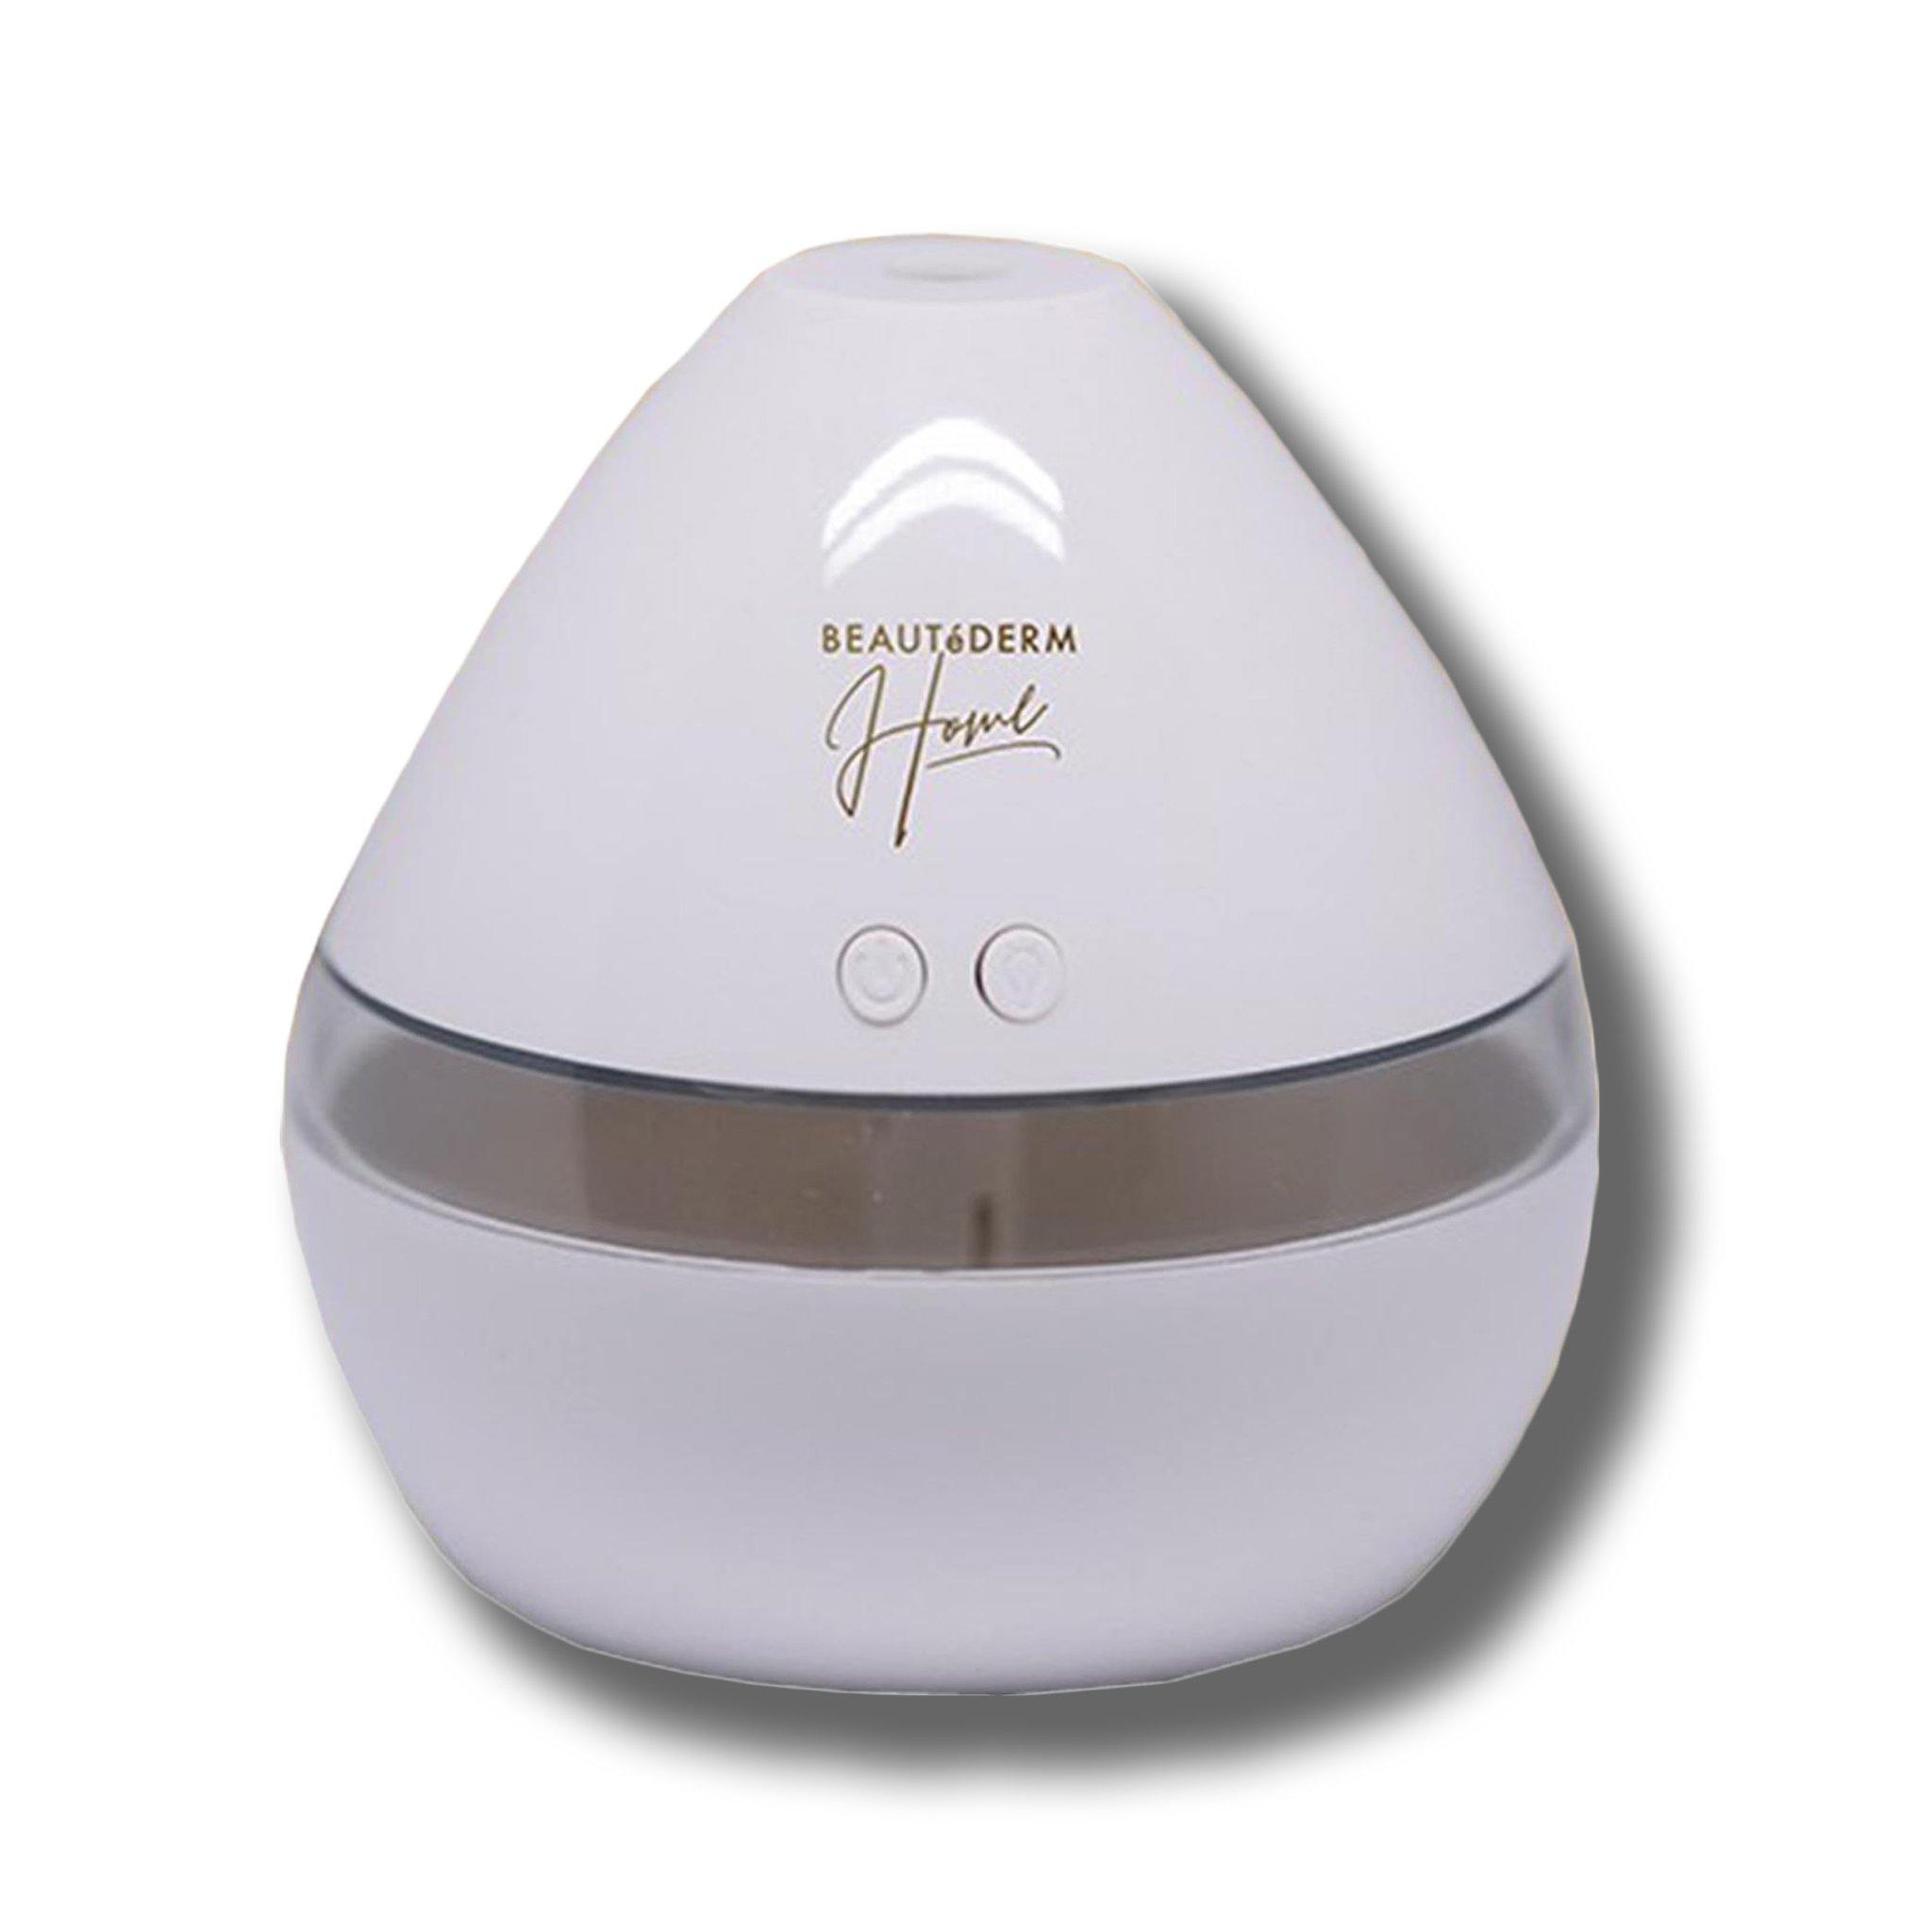 Beautederm Air Diffuser, Ultrasonic Aromatherapy Diffuser with LED Light